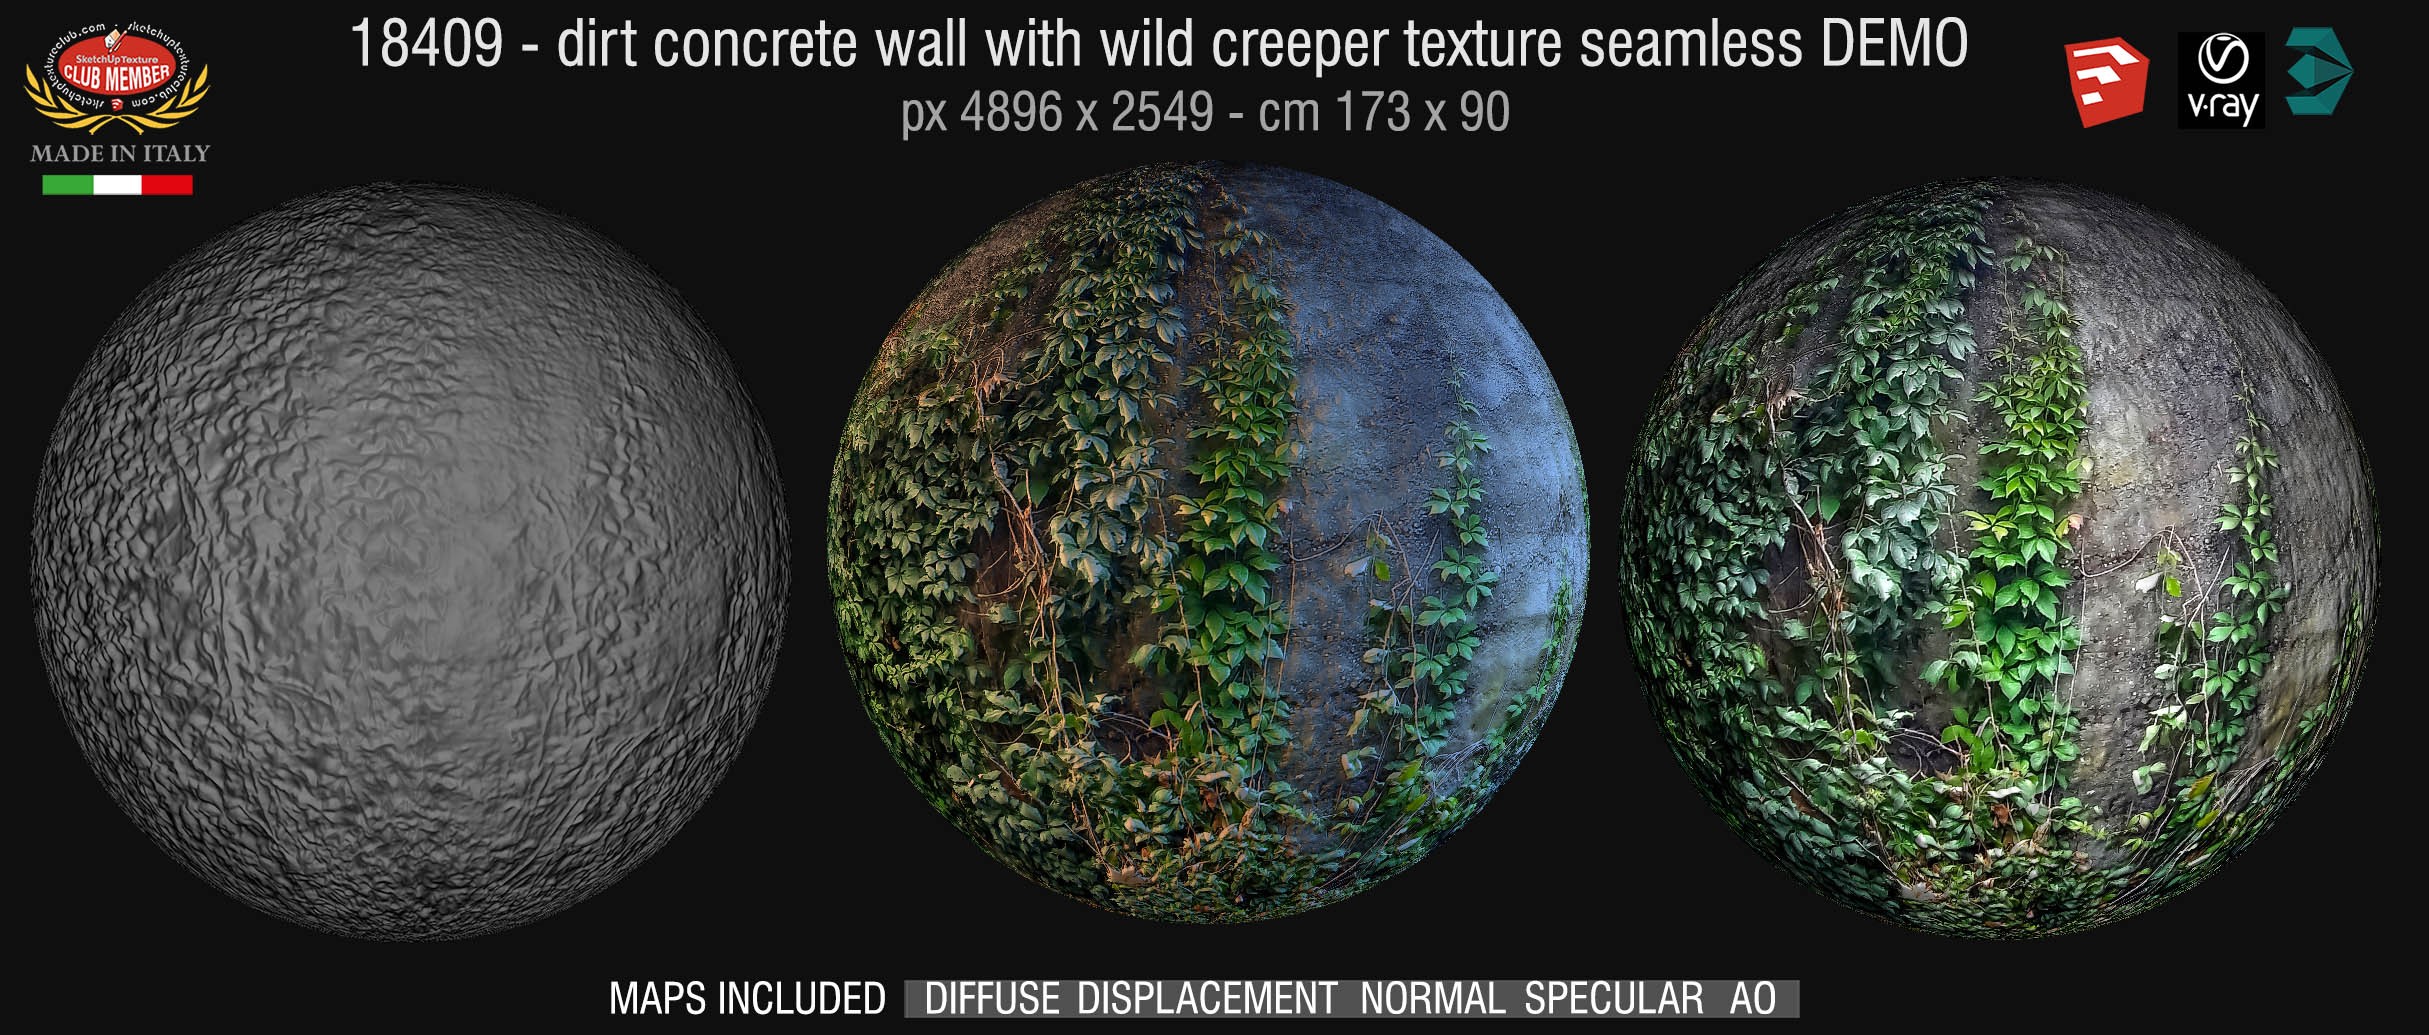 18409 HR Dirt concrete wall with wild creeper texture + maps DEMO